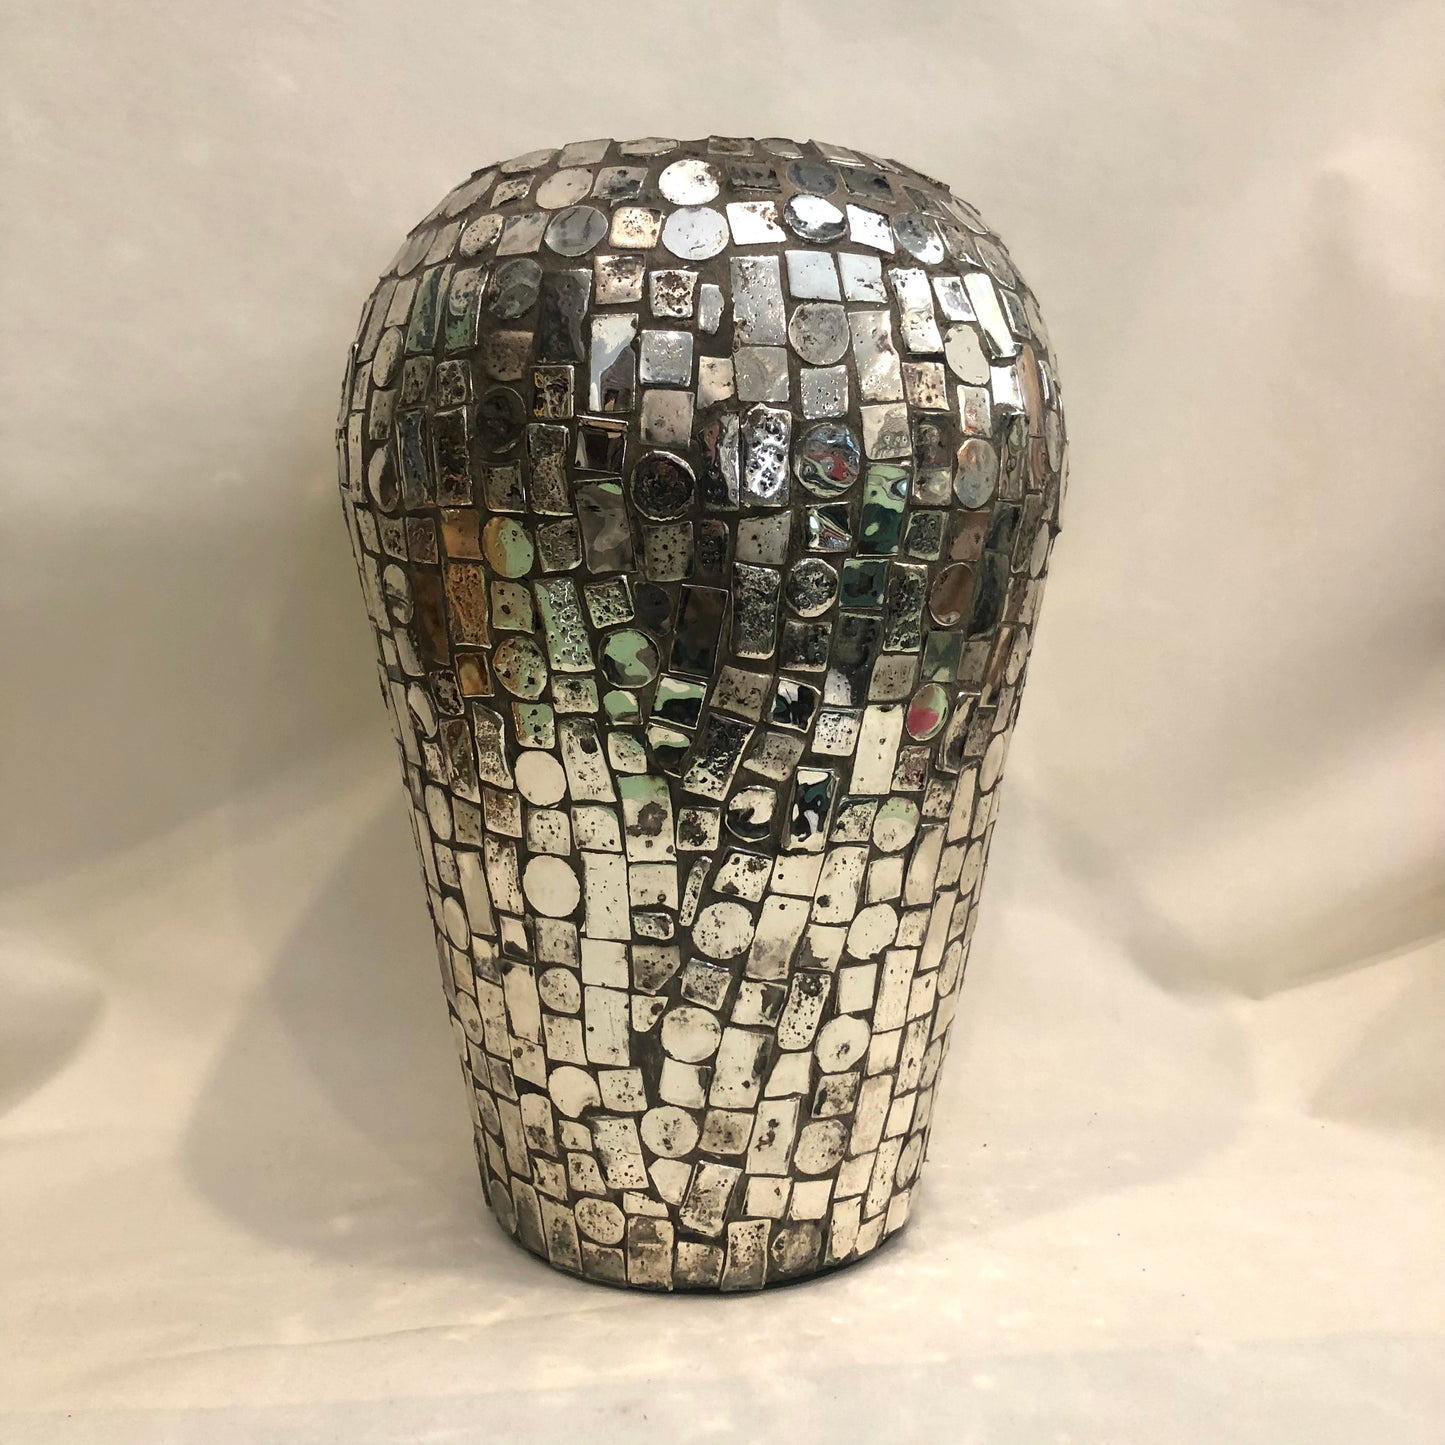 Vase, Mosaic with Silvery Discs